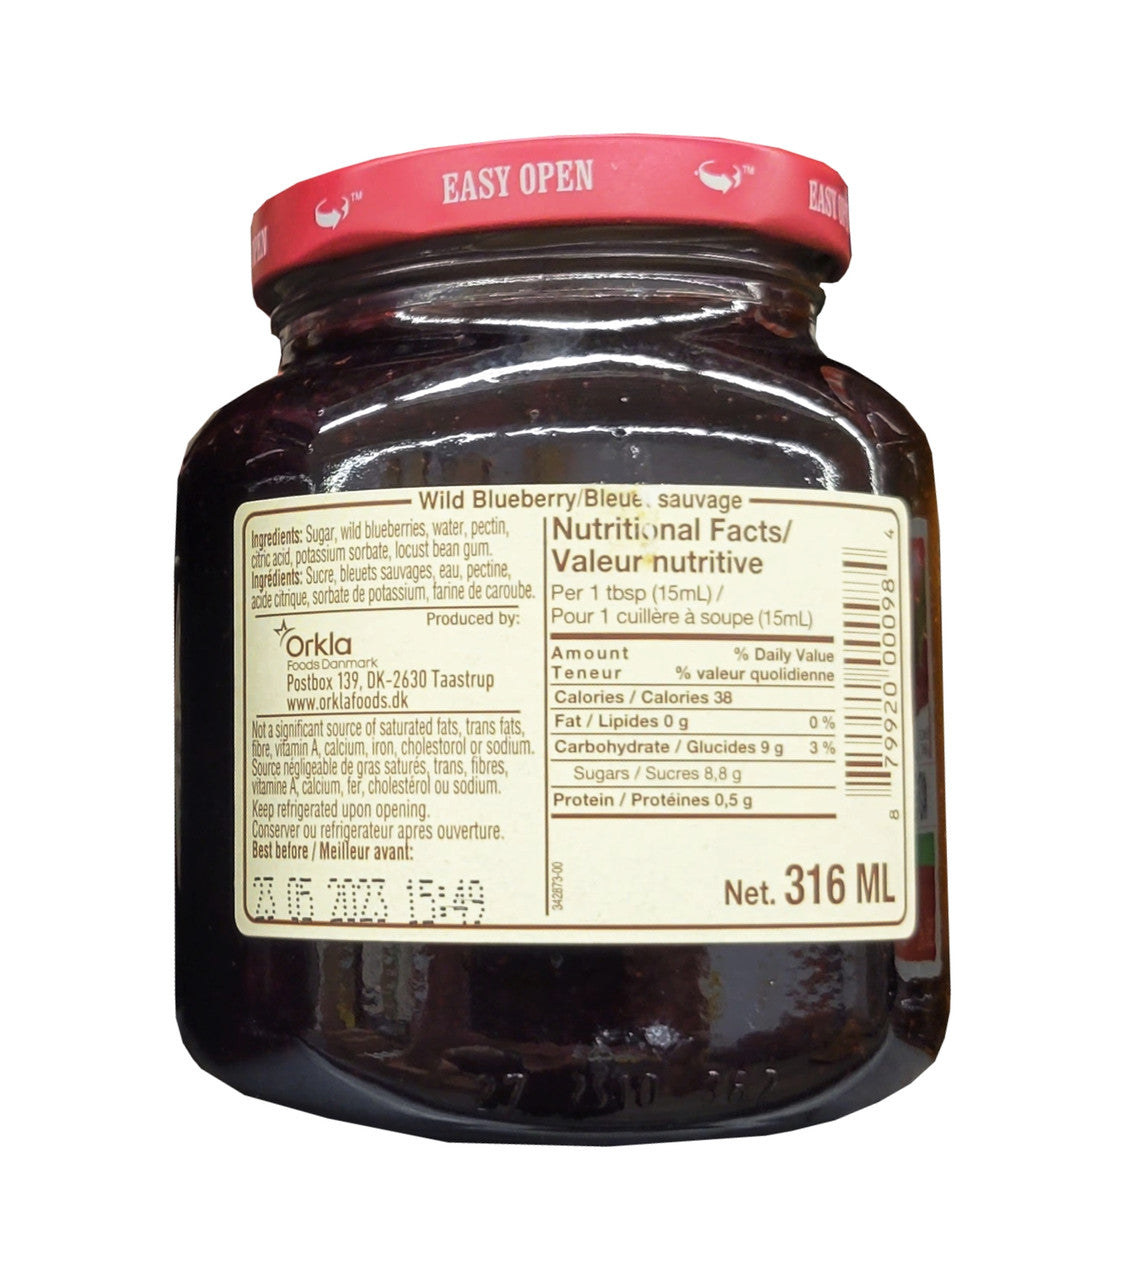 Danish Selection Wild Blueberry Fruit Spread, 316mL/11 oz., Jar {Imported from Canada}